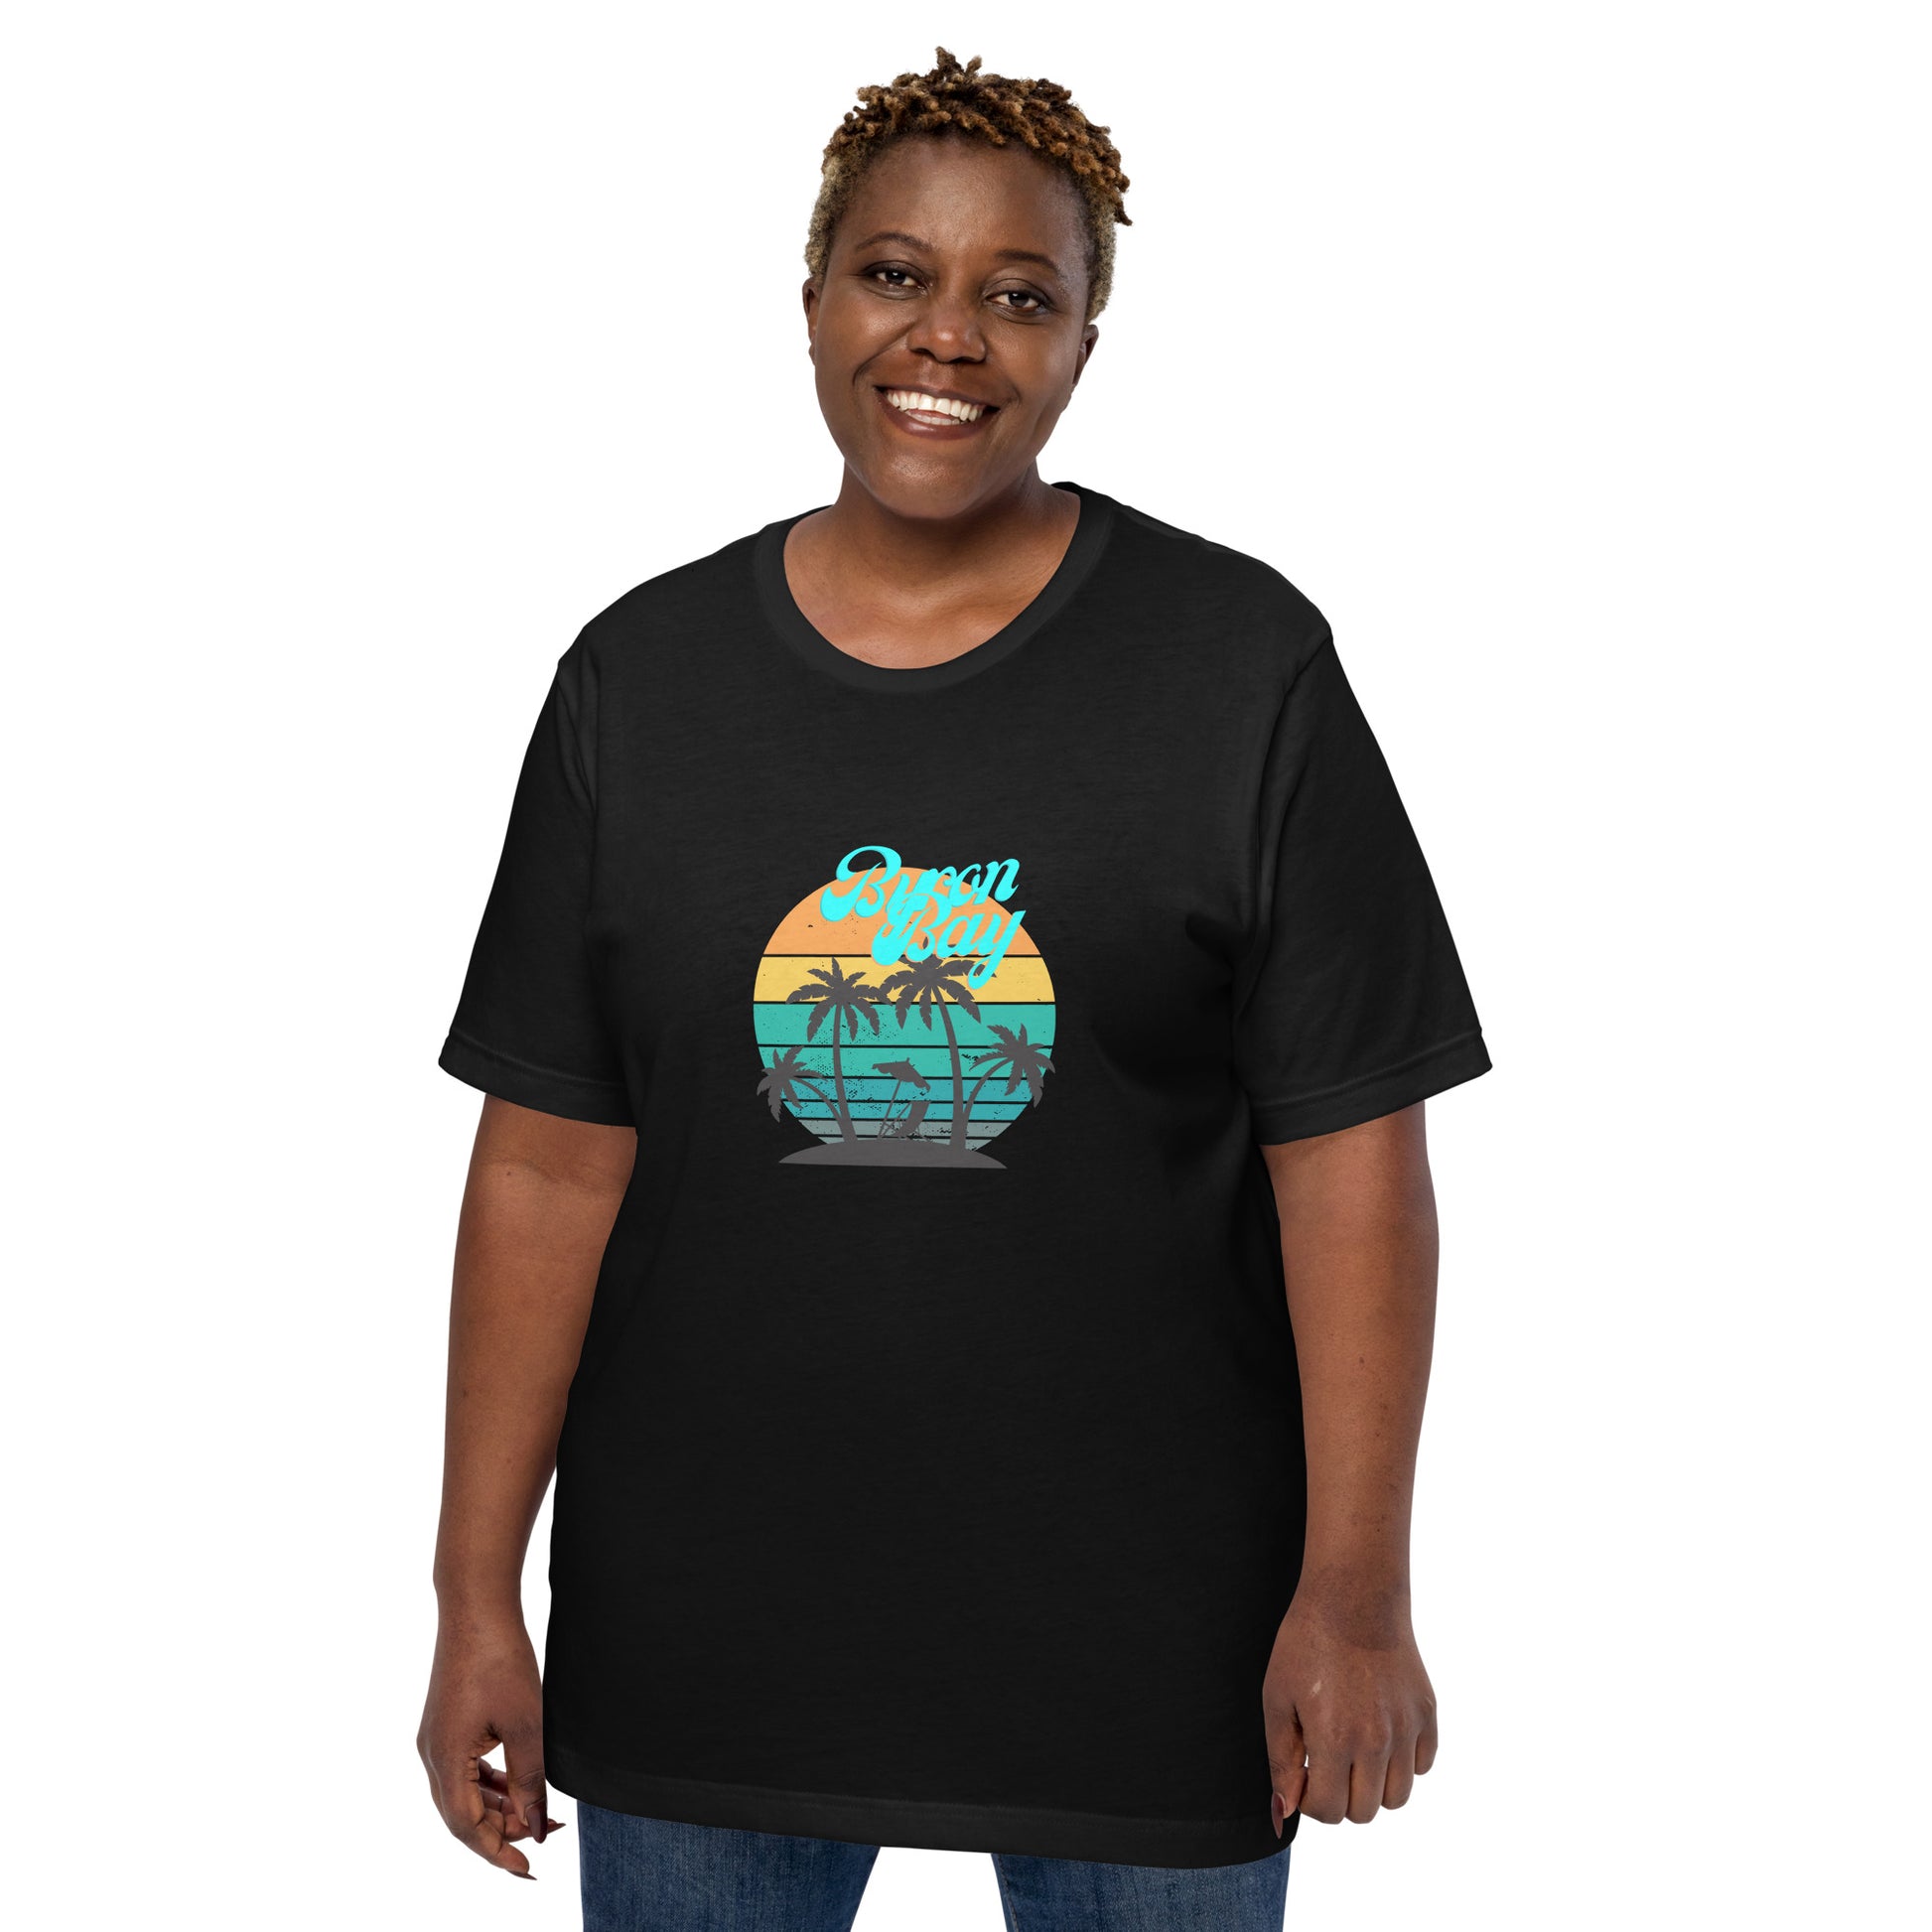  Unisex T-Shirt - Black - Front view, on woman standing with arms by side - Byron Bay design on front - Genuine Byron Bay Merchandise | Produced by Go Sea Kayak Byron Bay 